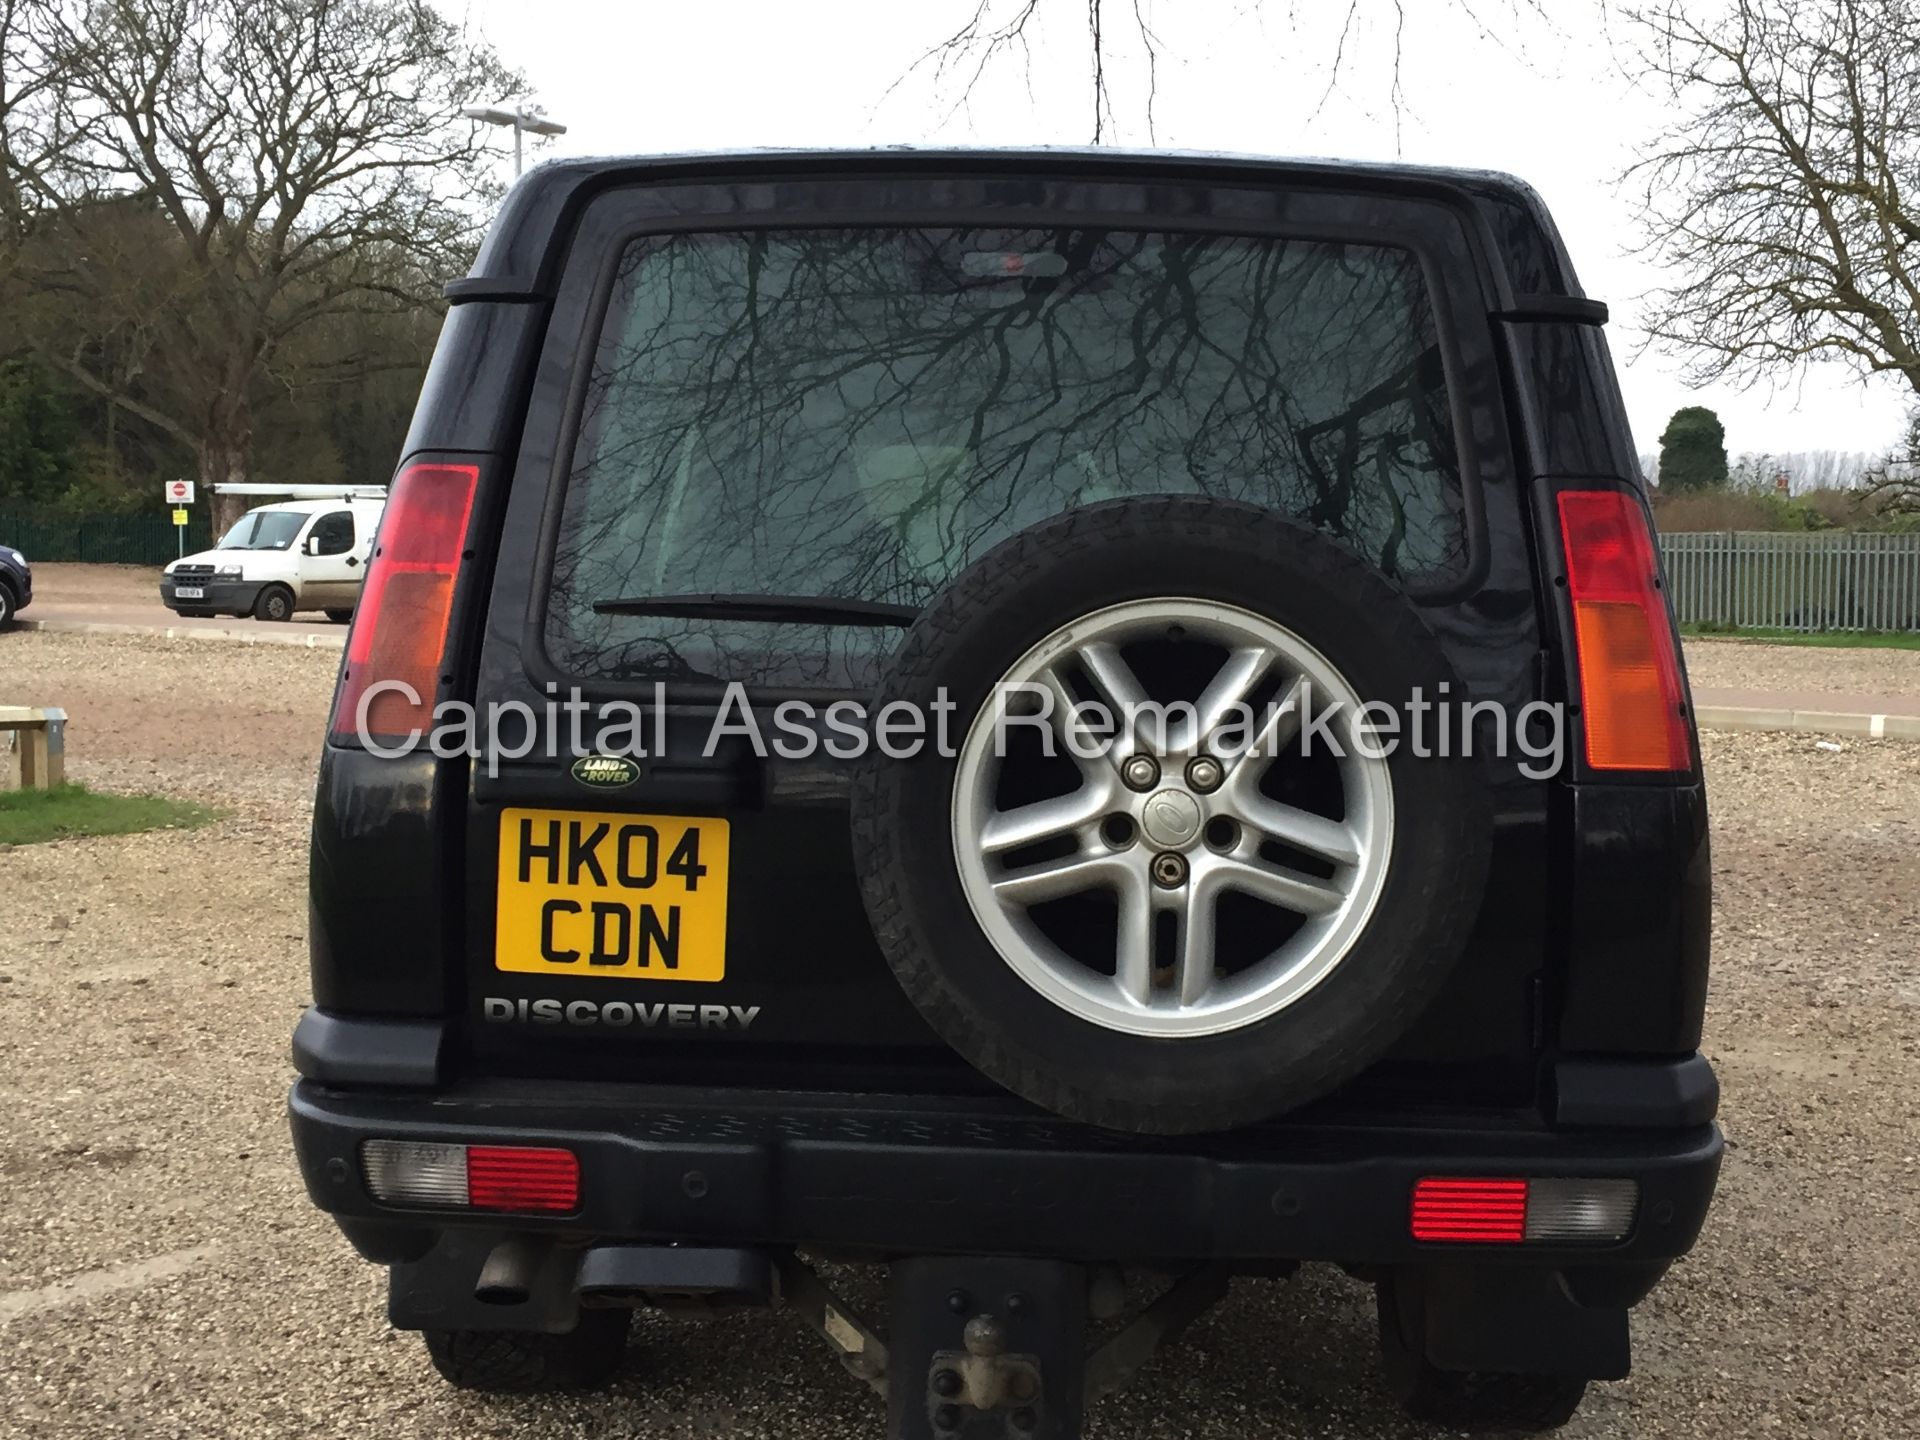 LAND ROVER DISCOVERY TD5 'LANDMARK' (2004 - 04 REG) 7 SEATER - LEATHER - AUTO (NO VAT - SAVE 20%) - Image 6 of 20